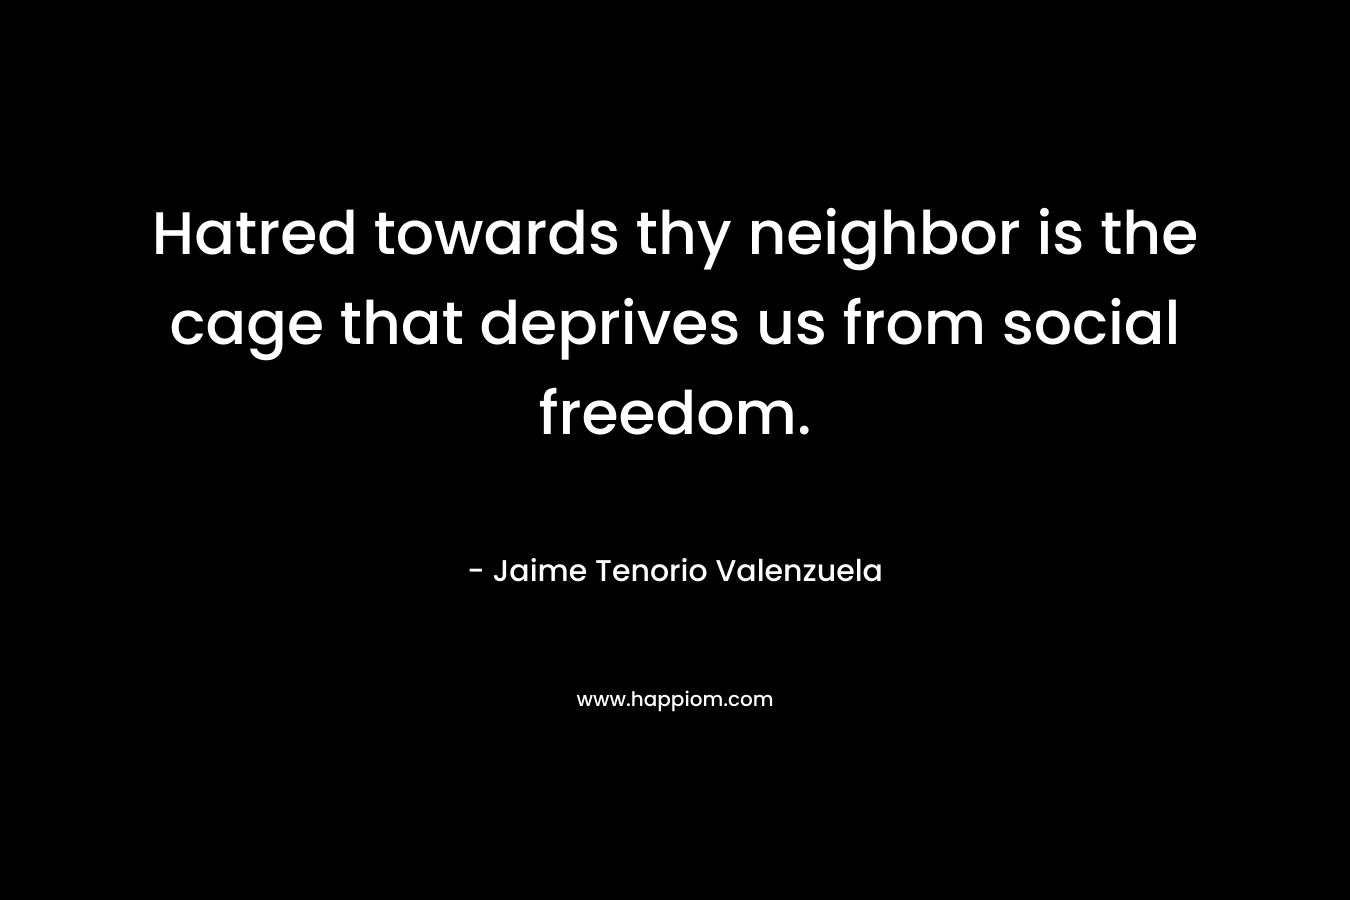 Hatred towards thy neighbor is the cage that deprives us from social freedom. – Jaime Tenorio Valenzuela